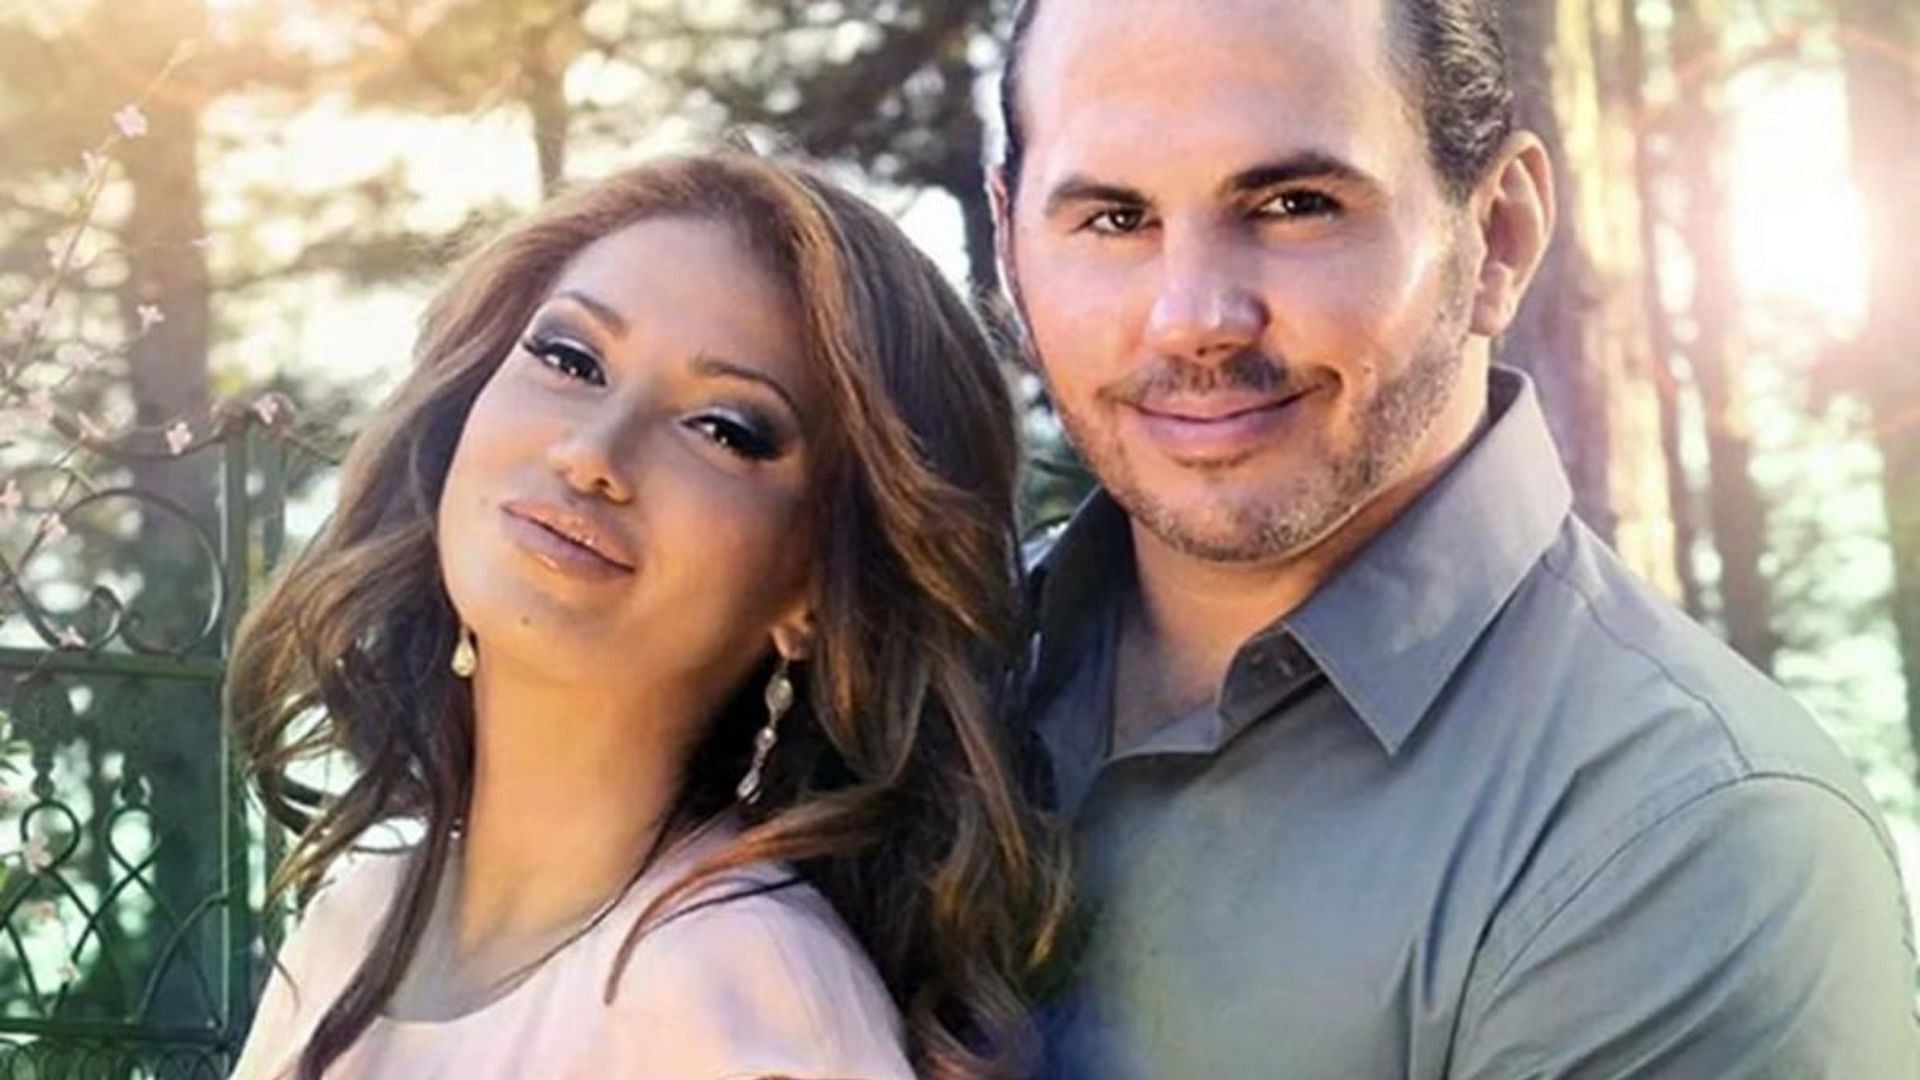 Matt and Reby Hardy began dating in 2011.